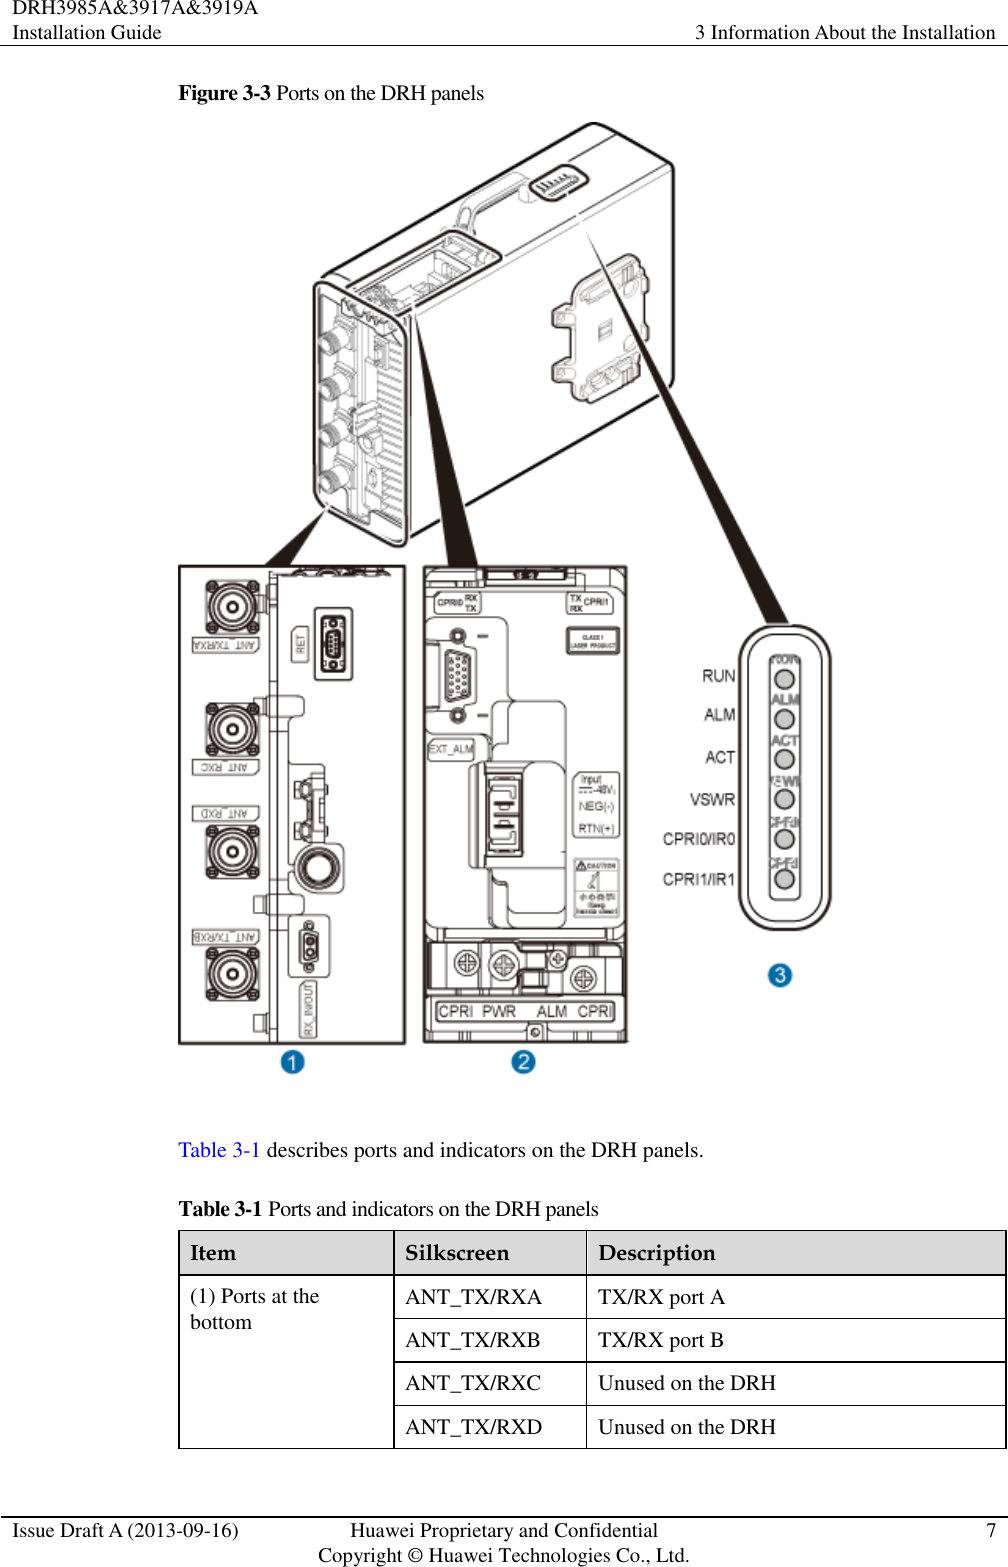 DRH3985A&amp;3917A&amp;3919A Installation Guide 3 Information About the Installation  Issue Draft A (2013-09-16) Huawei Proprietary and Confidential                                     Copyright © Huawei Technologies Co., Ltd. 7  Figure 3-3 Ports on the DRH panels   Table 3-1 describes ports and indicators on the DRH panels. Table 3-1 Ports and indicators on the DRH panels Item Silkscreen Description (1) Ports at the bottom ANT_TX/RXA TX/RX port A ANT_TX/RXB TX/RX port B ANT_TX/RXC Unused on the DRH ANT_TX/RXD Unused on the DRH 